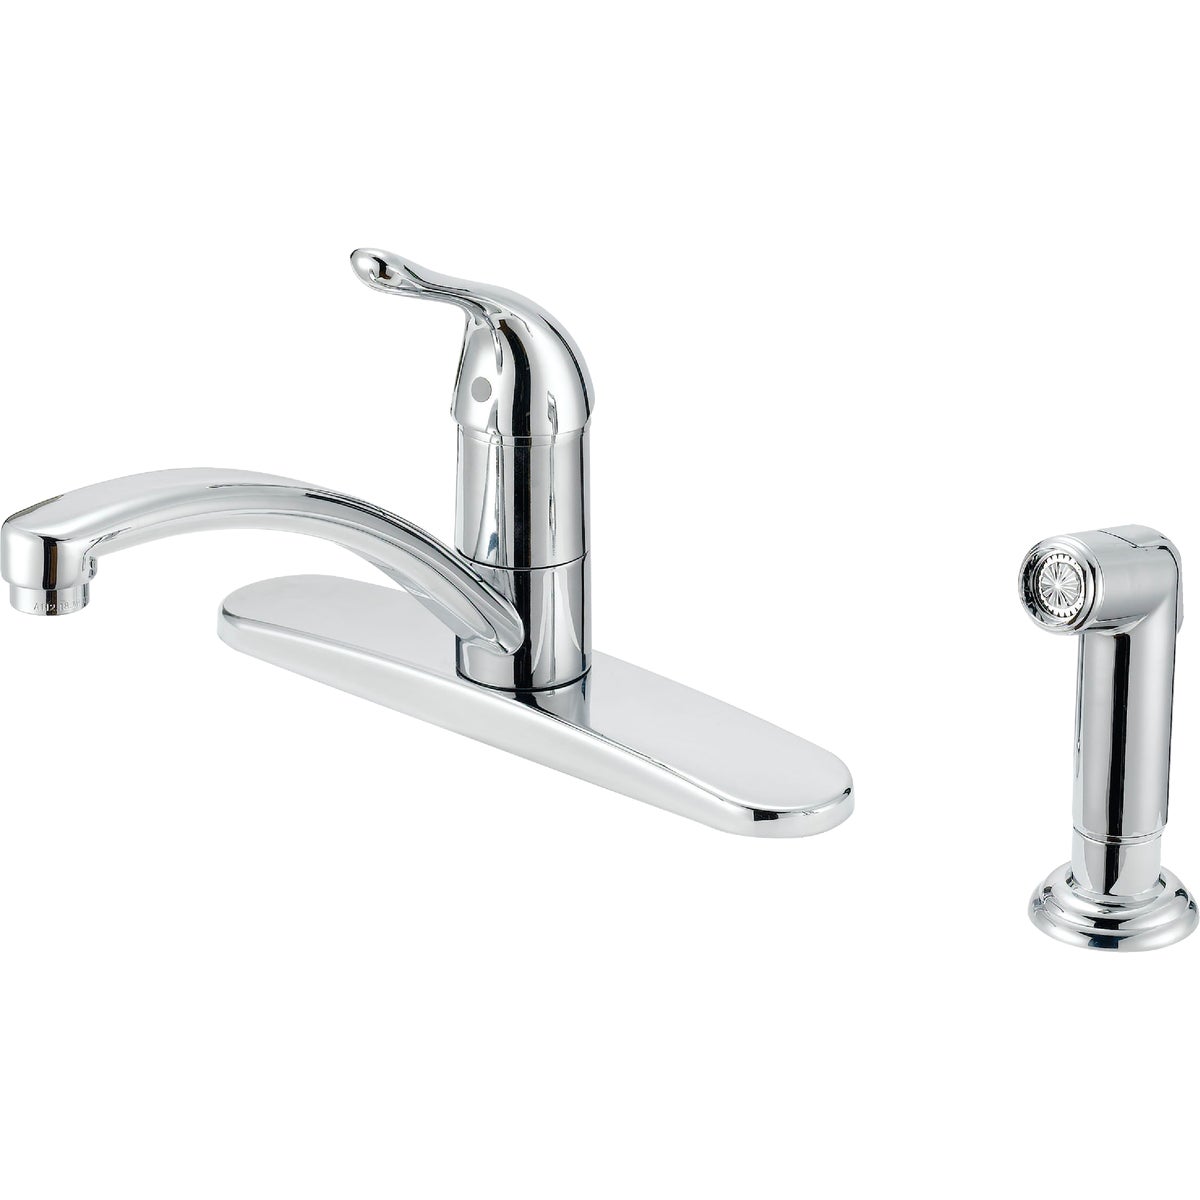 Item 405147, Single handle kitchen faucet with matching finish side spray.